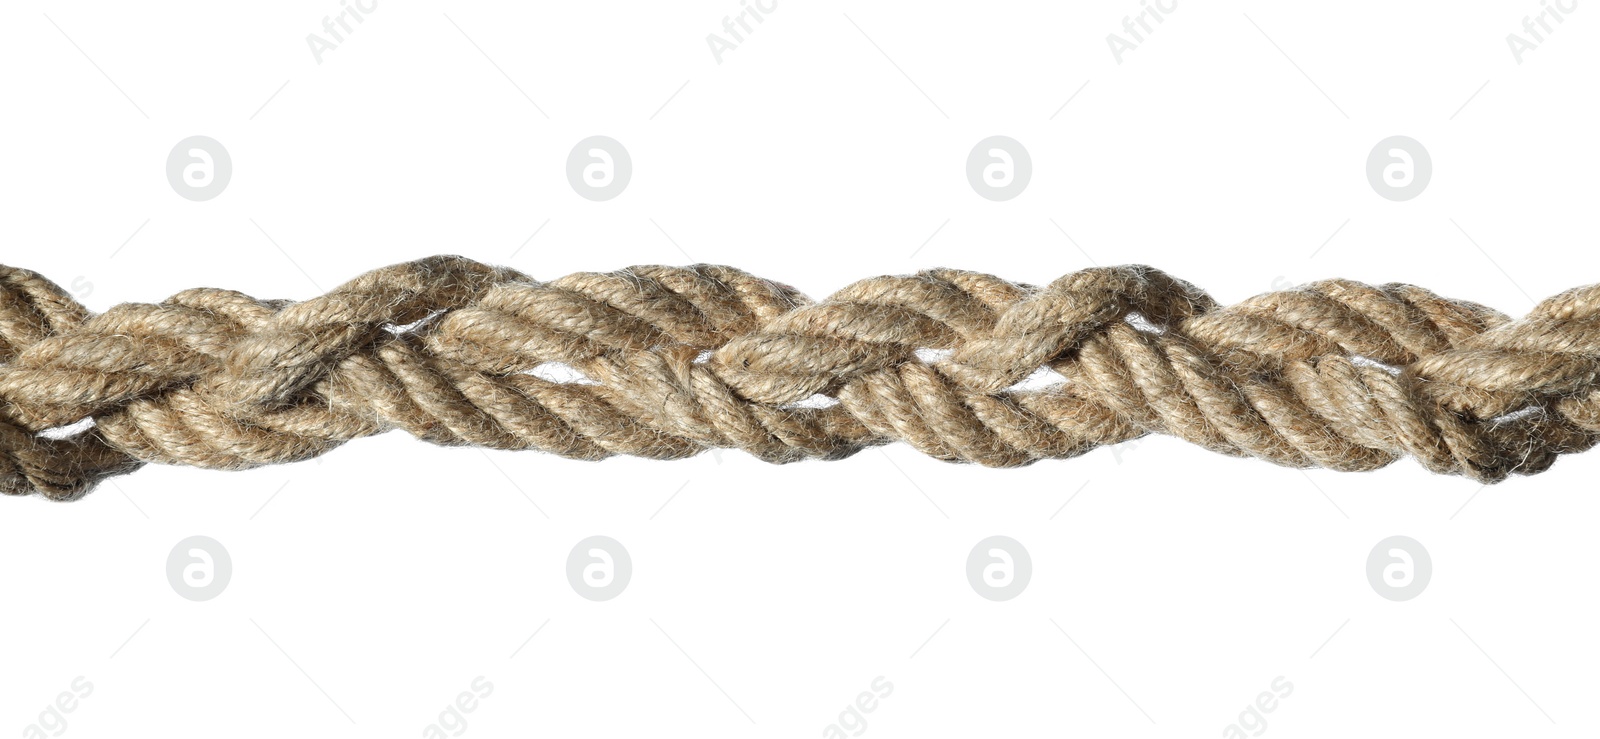 Photo of Hemp rope with knots isolated on white